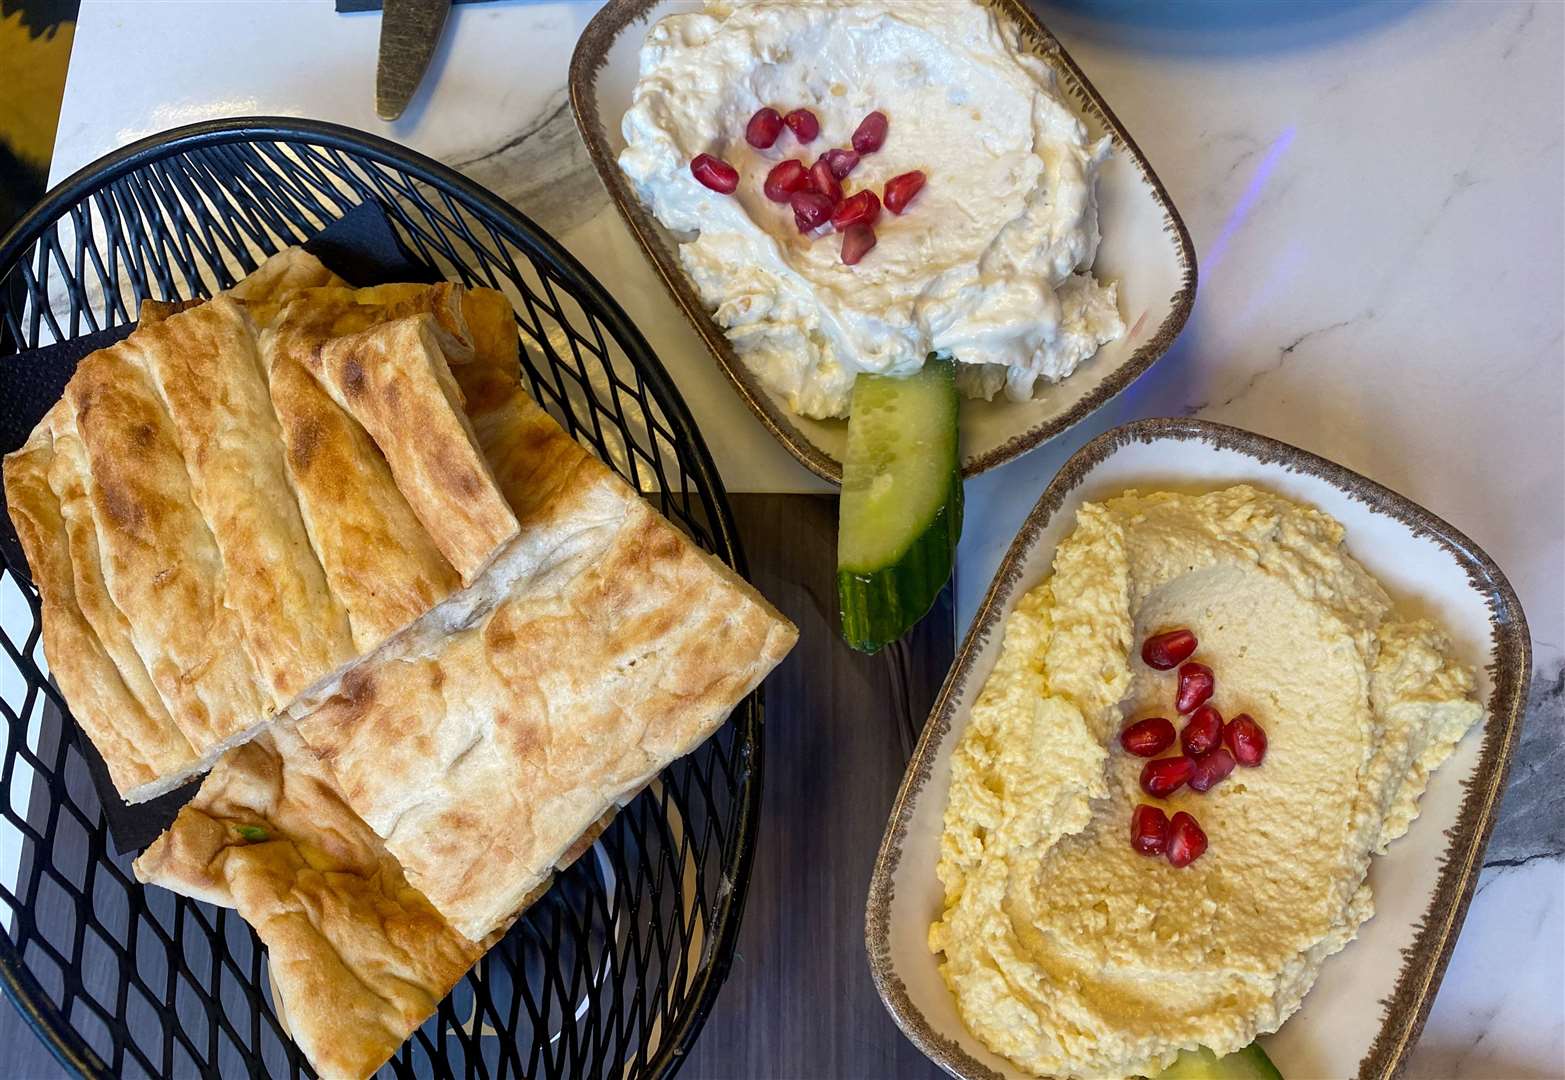 The tasty hummus and baba ganoush dips got the meal off to an excellent start